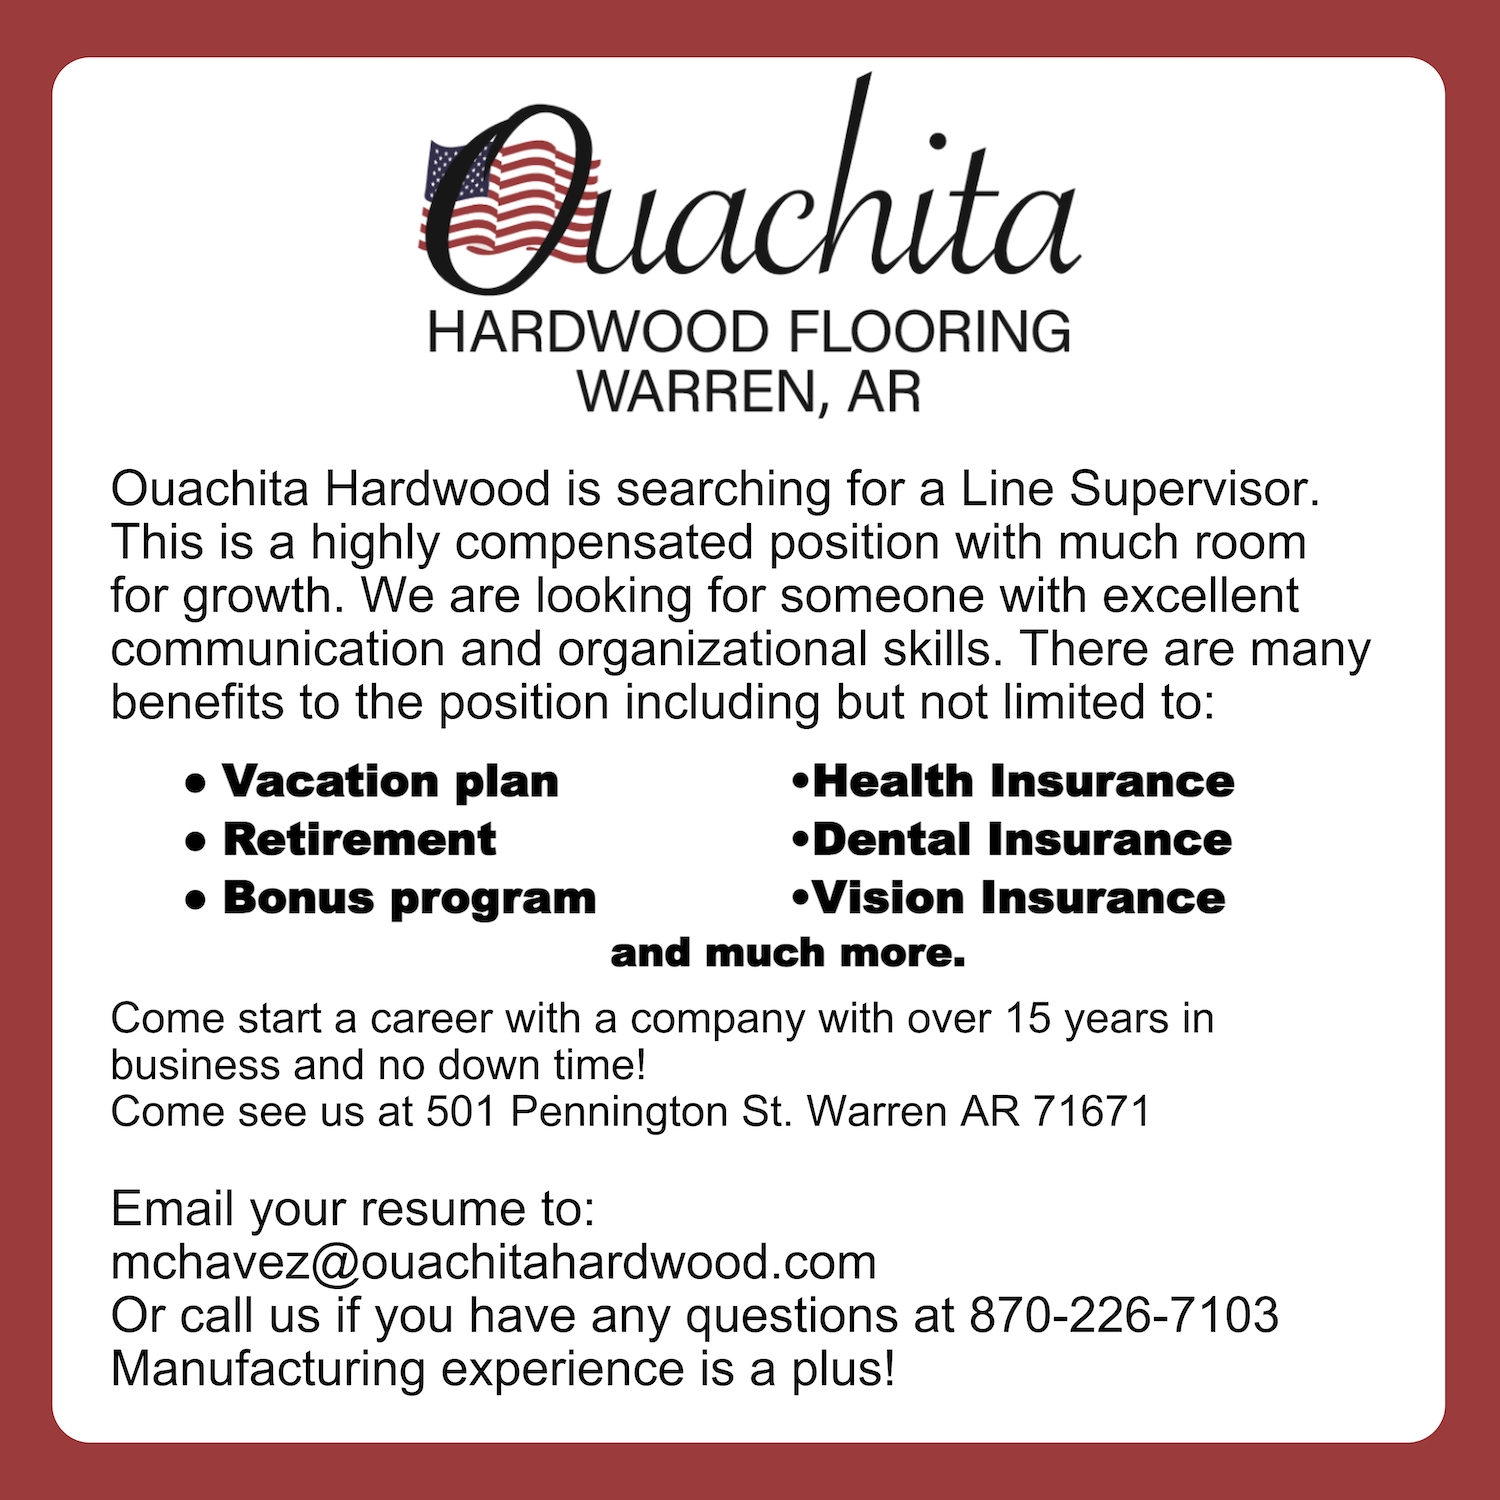 Ouachita Hardwood Flooring is searching for a Line Supervisor